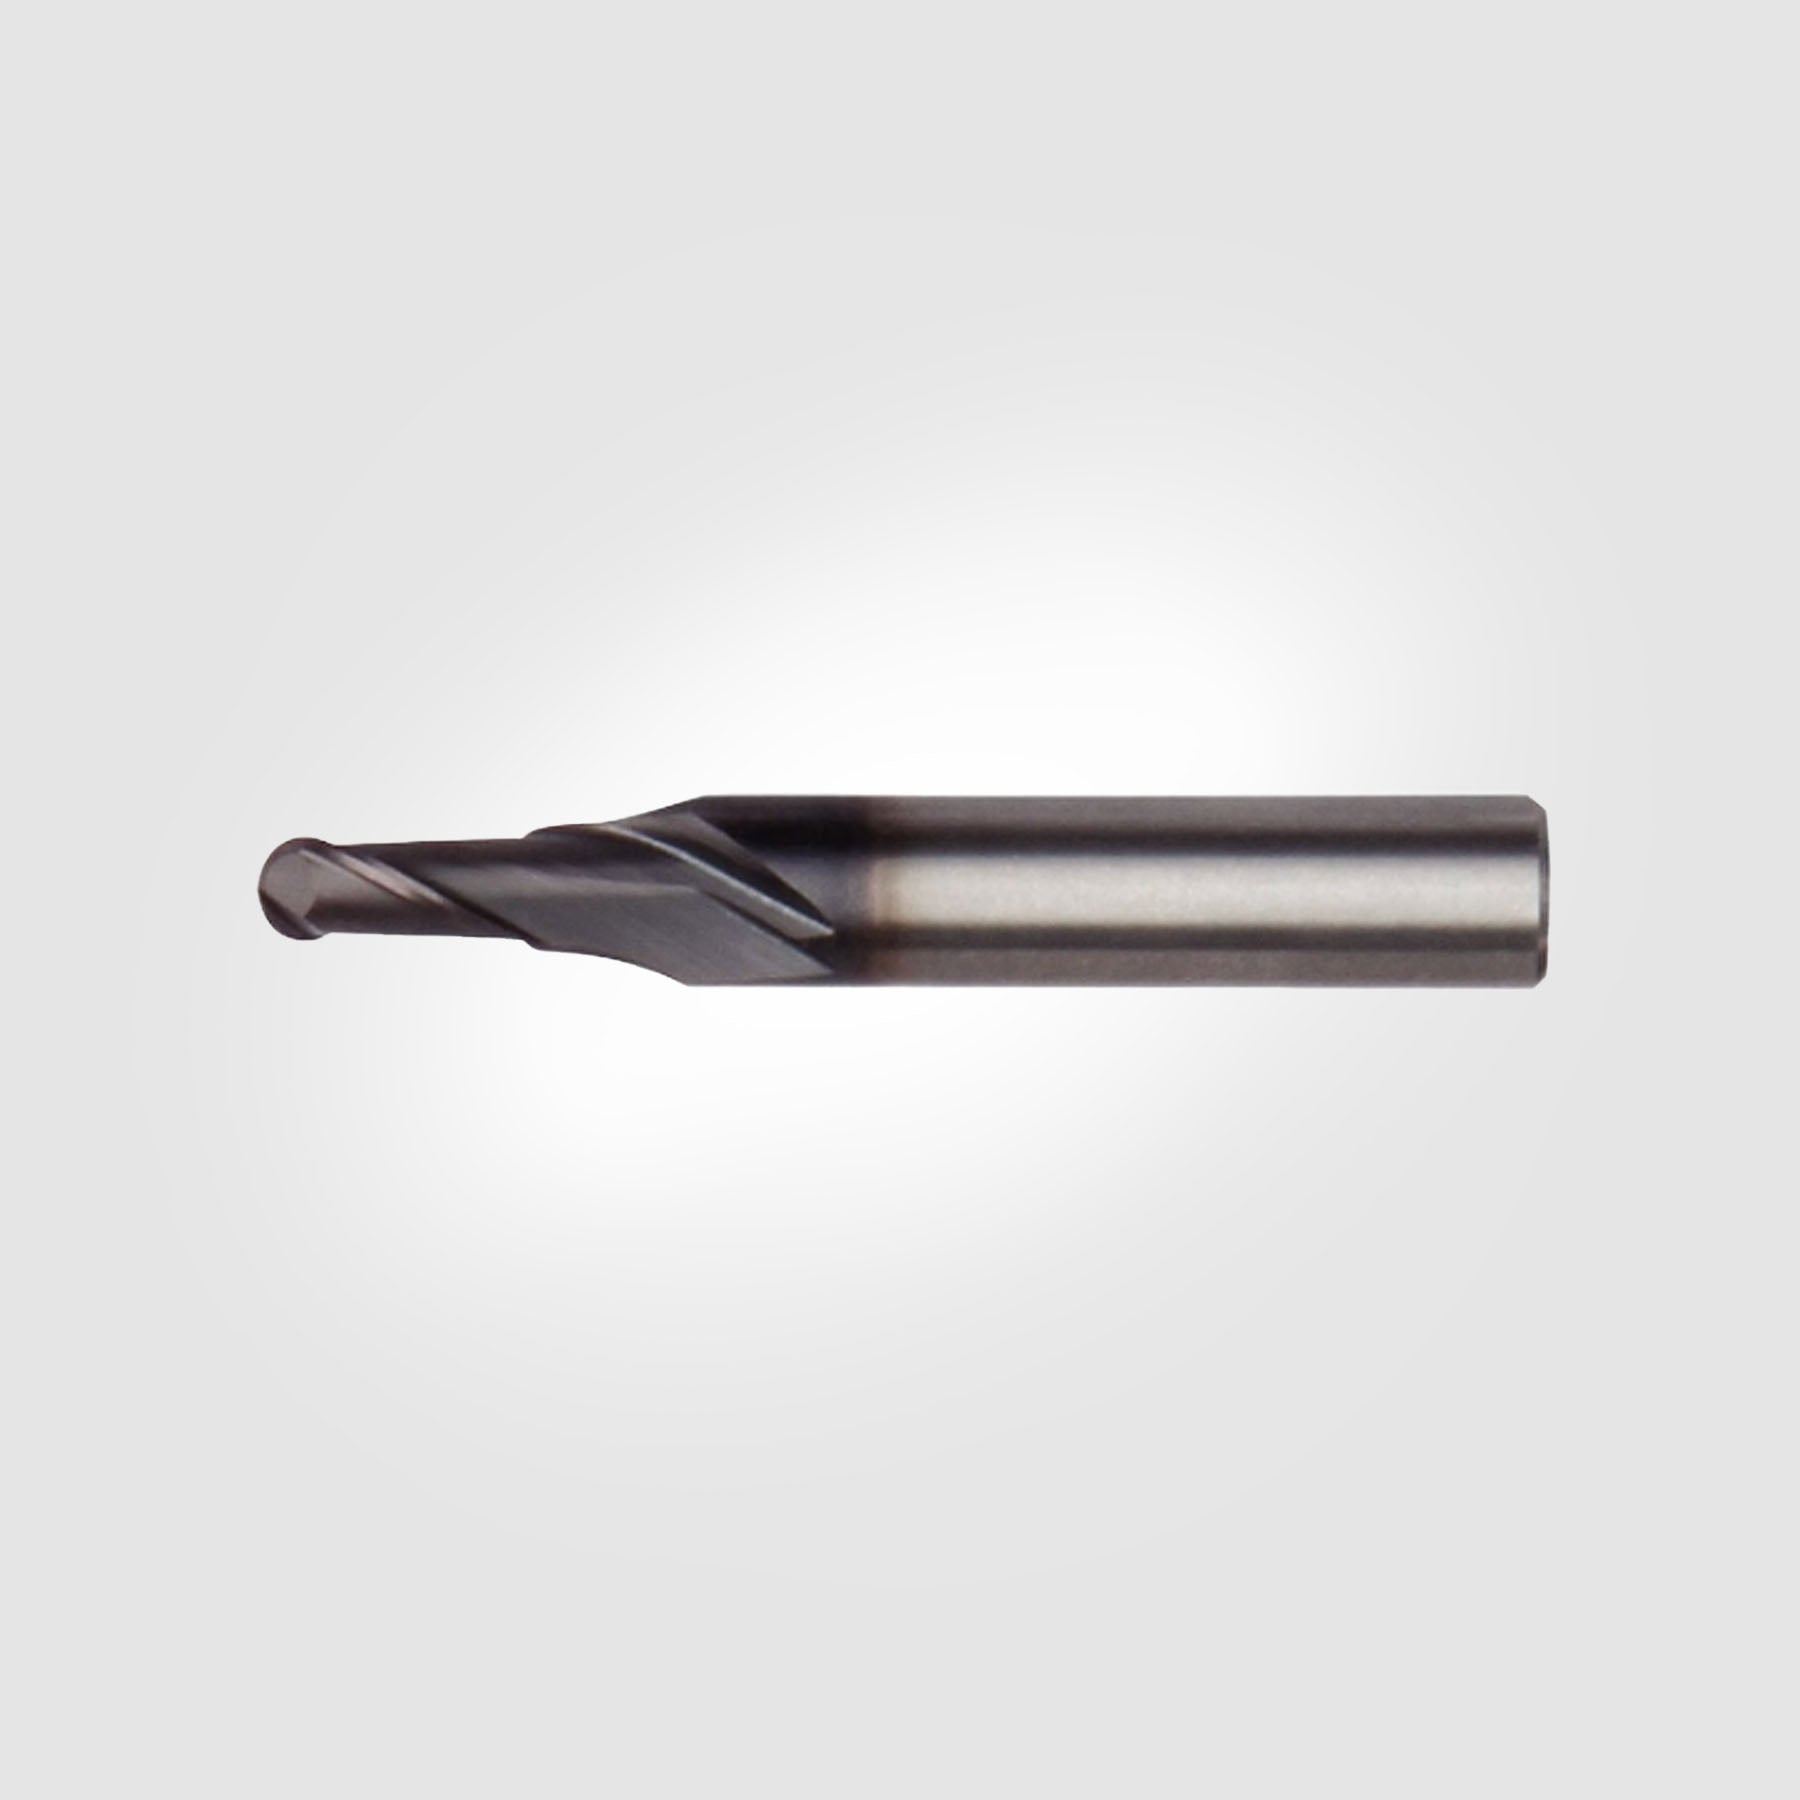 1/2" x 1" x 3" GOmill (BALL NOSE) | ACADEMY TOOL KIT | 4173915